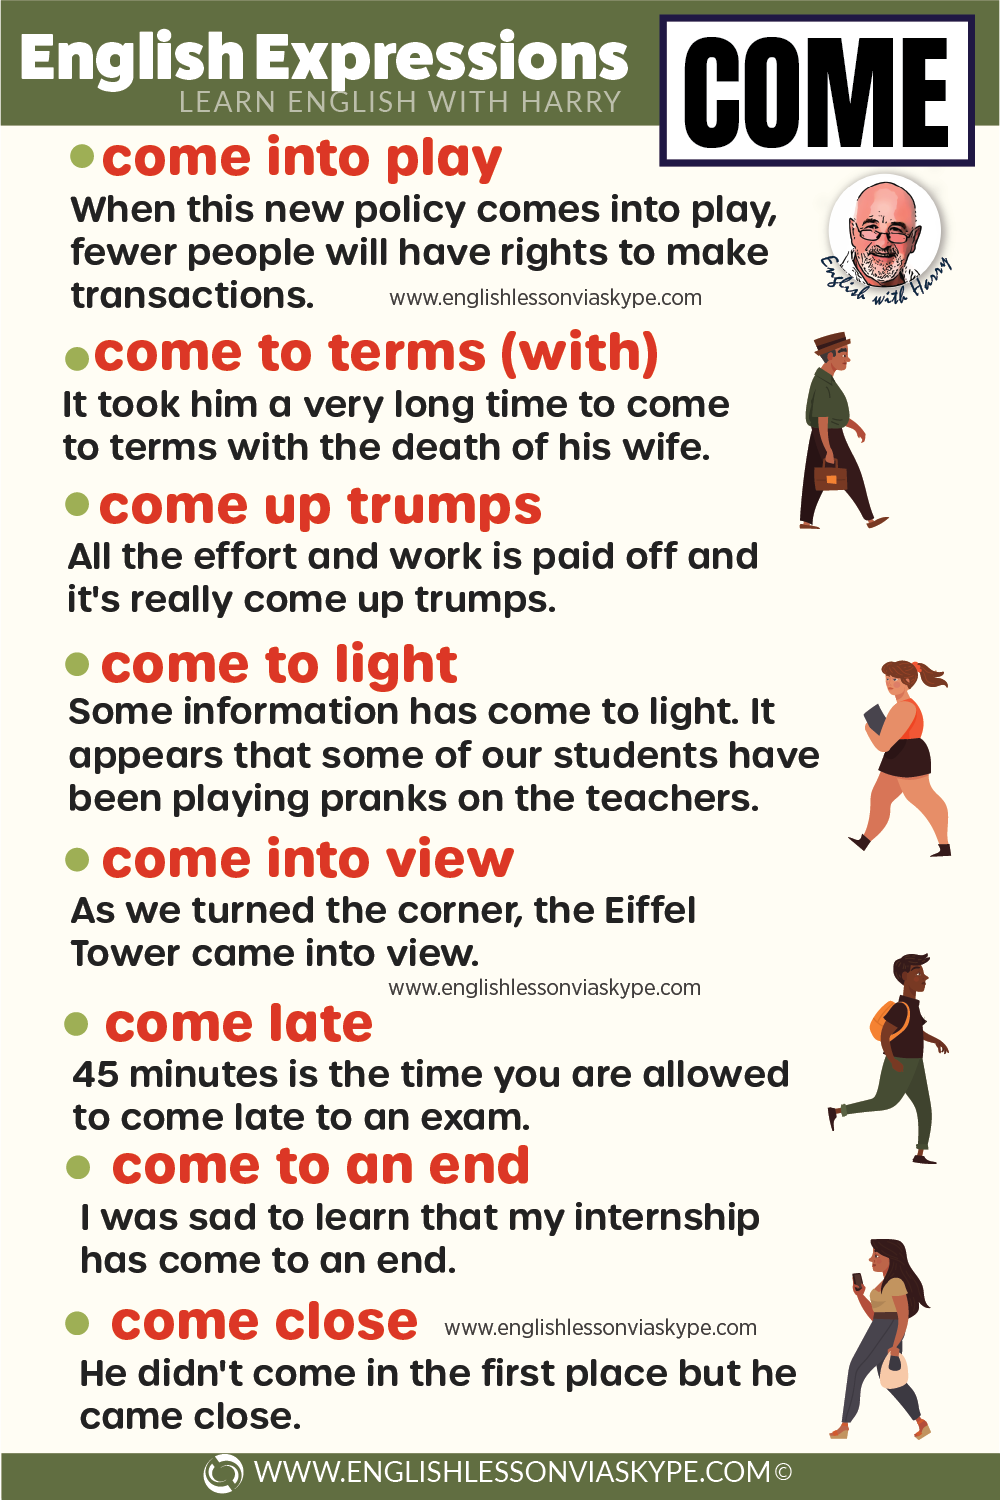 COME: 25 Collocations with Come.Study English advanced level at www.englishlessonviaskype.com #learnenglish #englishlessons #영어학습 #tienganh #EnglishTeacher #vocabulary #ingles #อังกฤษ #английский #英语 #영어 #aprenderingles #english #cursodeingles #aprenderingles #учианглийский #cursodeingles #learningenglish #ingilizce